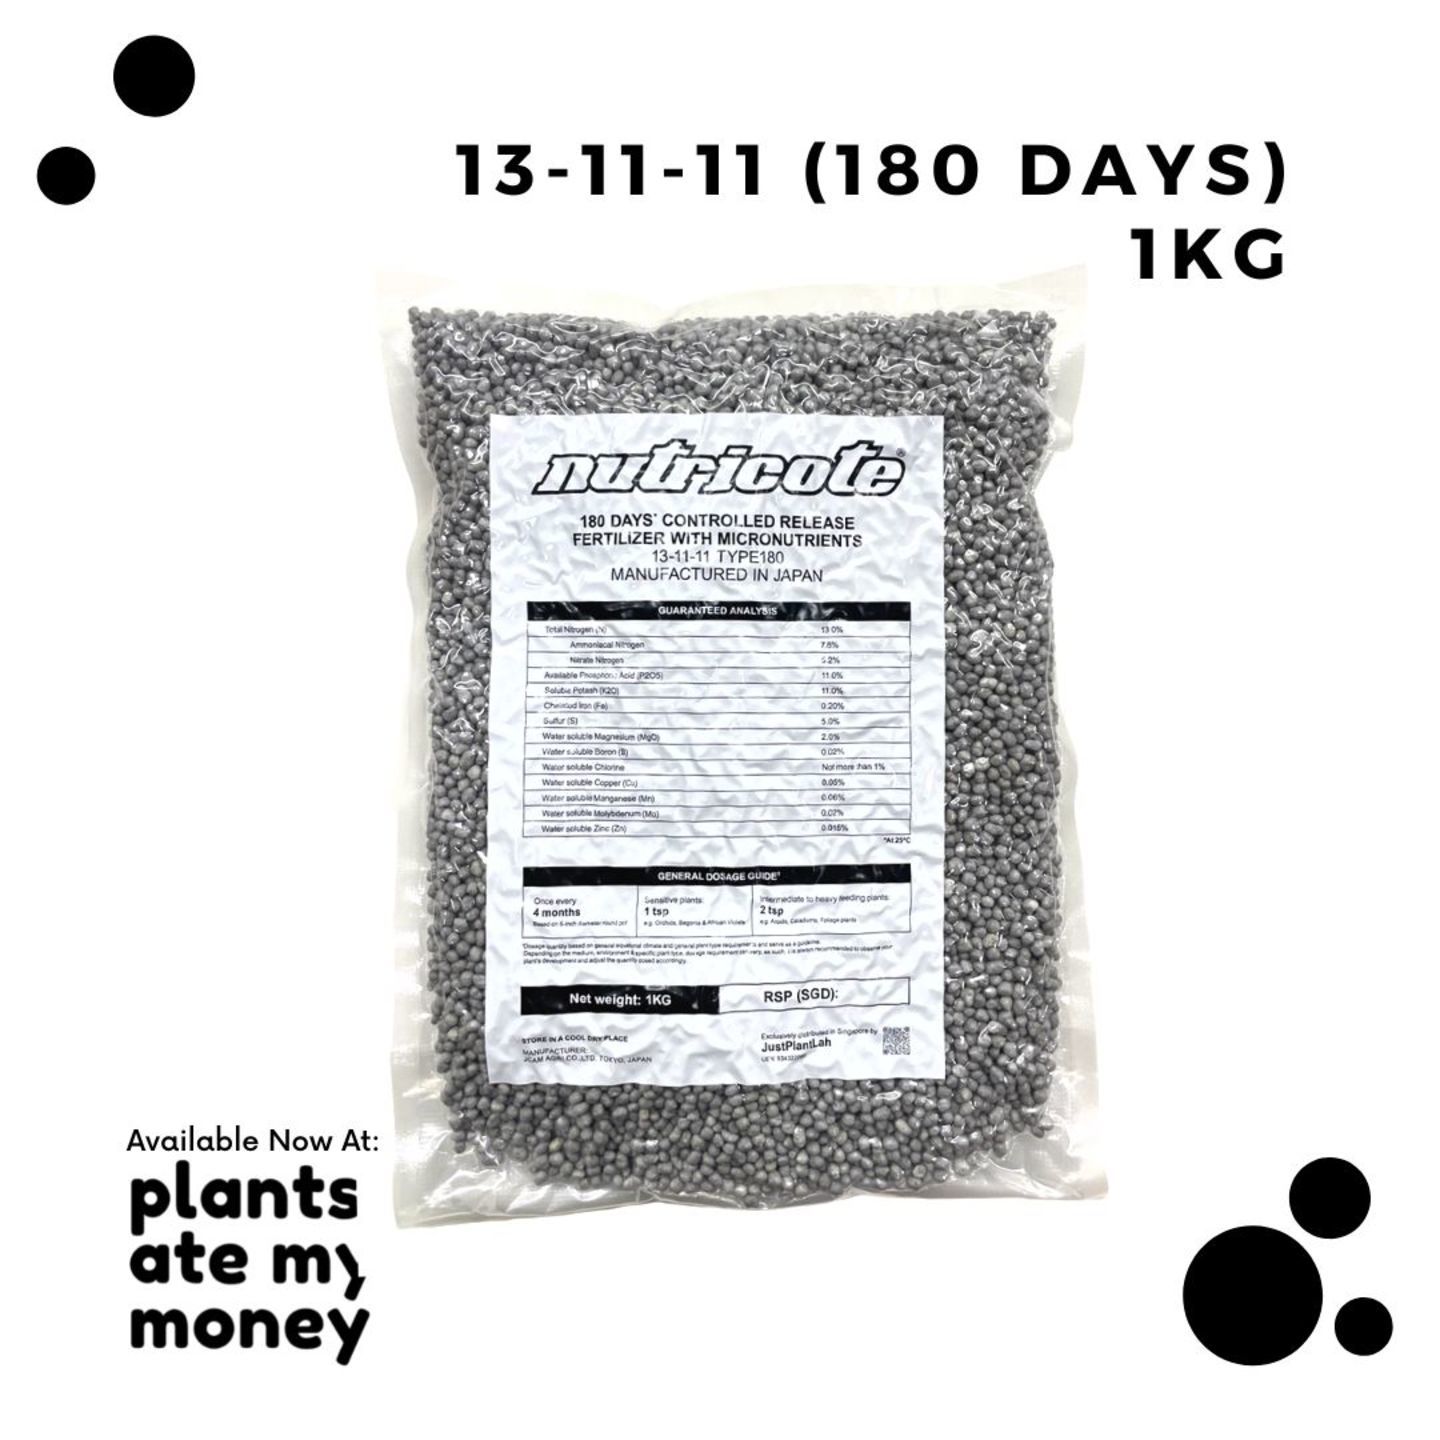 1kg - 13-11-11 180 Days Nutricote Controlled Release Fertilizer with Micronutrients